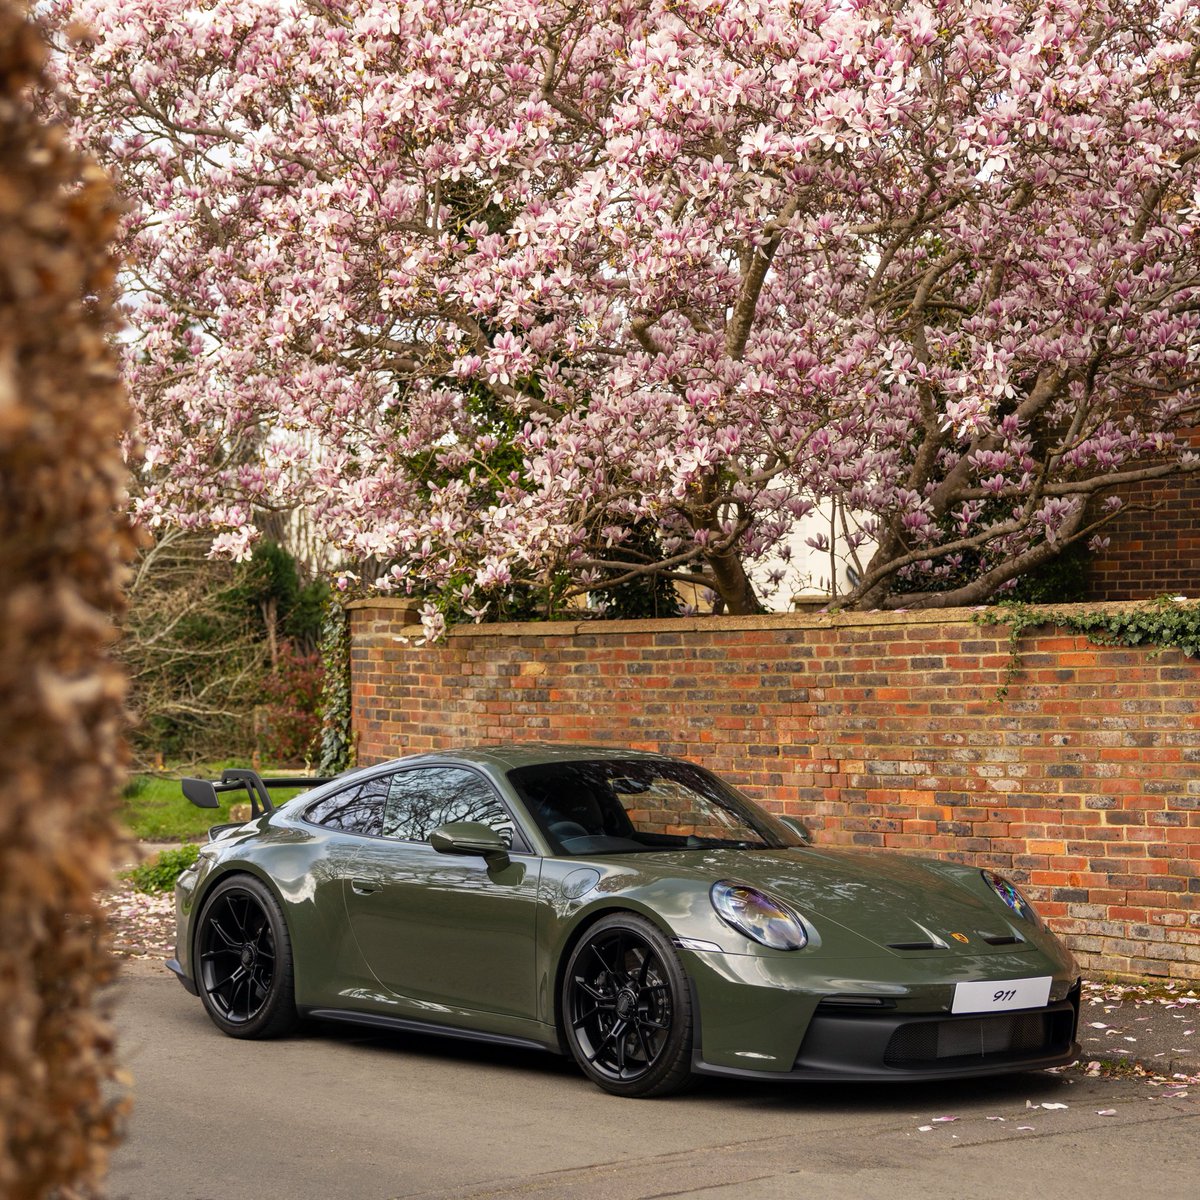 Amidst a flurry of pink blossoms, the Black Olive GT3 steals the spotlight, a masterpiece of speed and style in the tranquility of spring 🌸